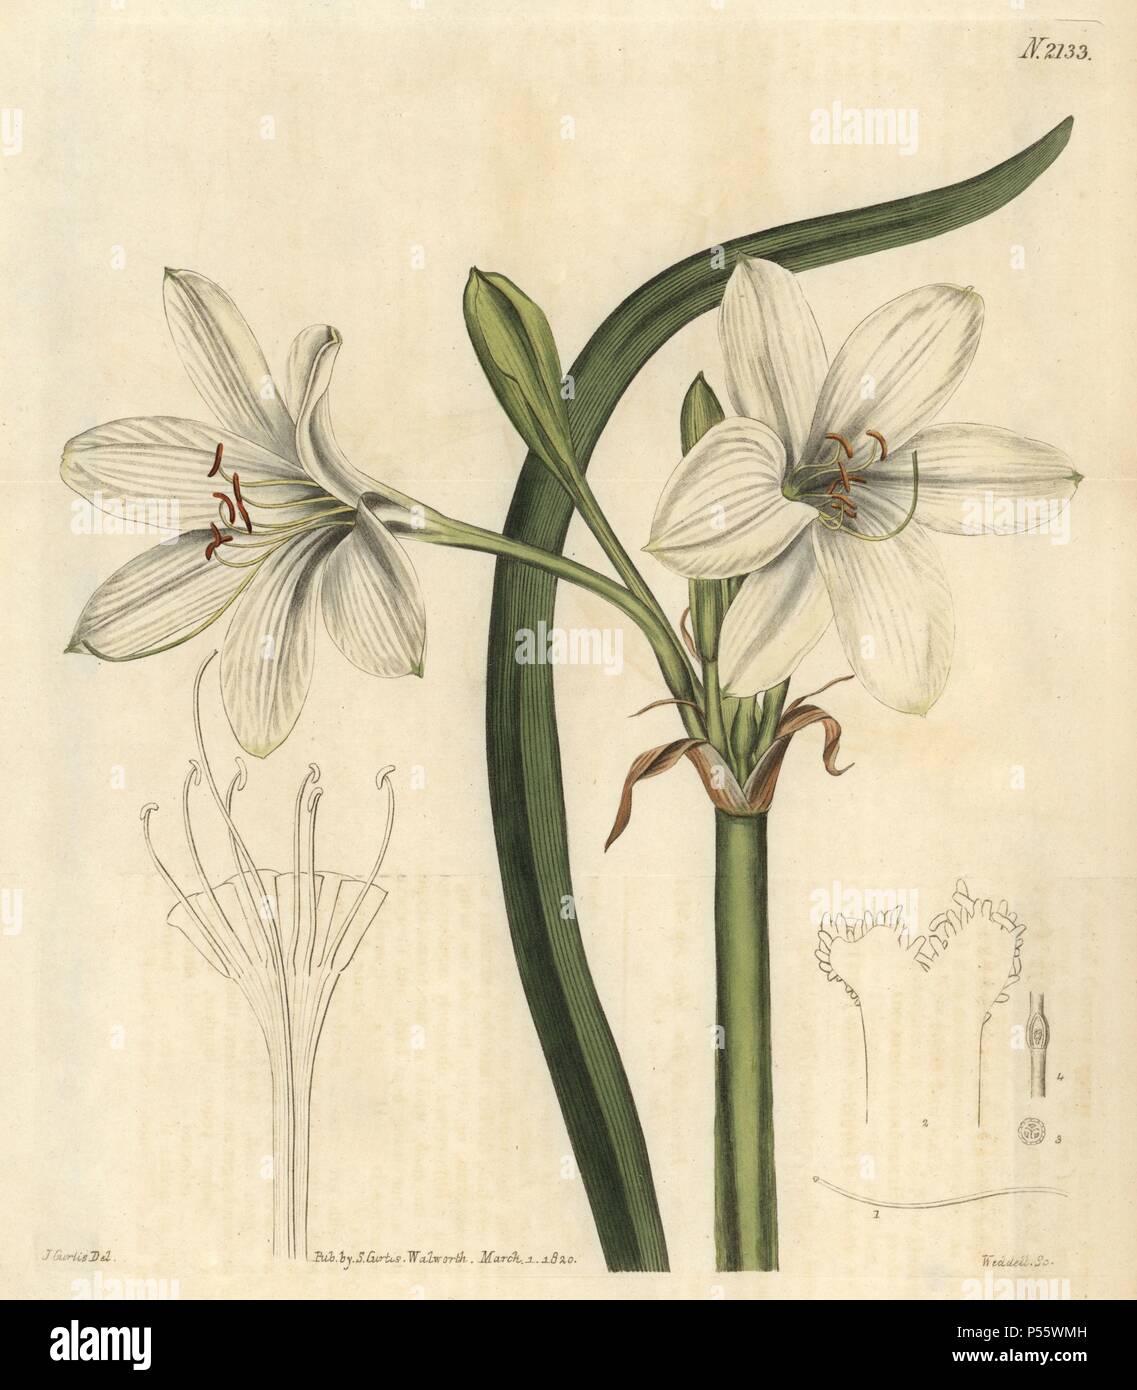 Macquarie crinum, Crinum flaccidum. Handcoloured copperplate engraving drawn by John Curtis and engraved by Weddell from 'Curtis's Botanical Magazine'1820, Samuel Curtis, Walworth, London. Stock Photo